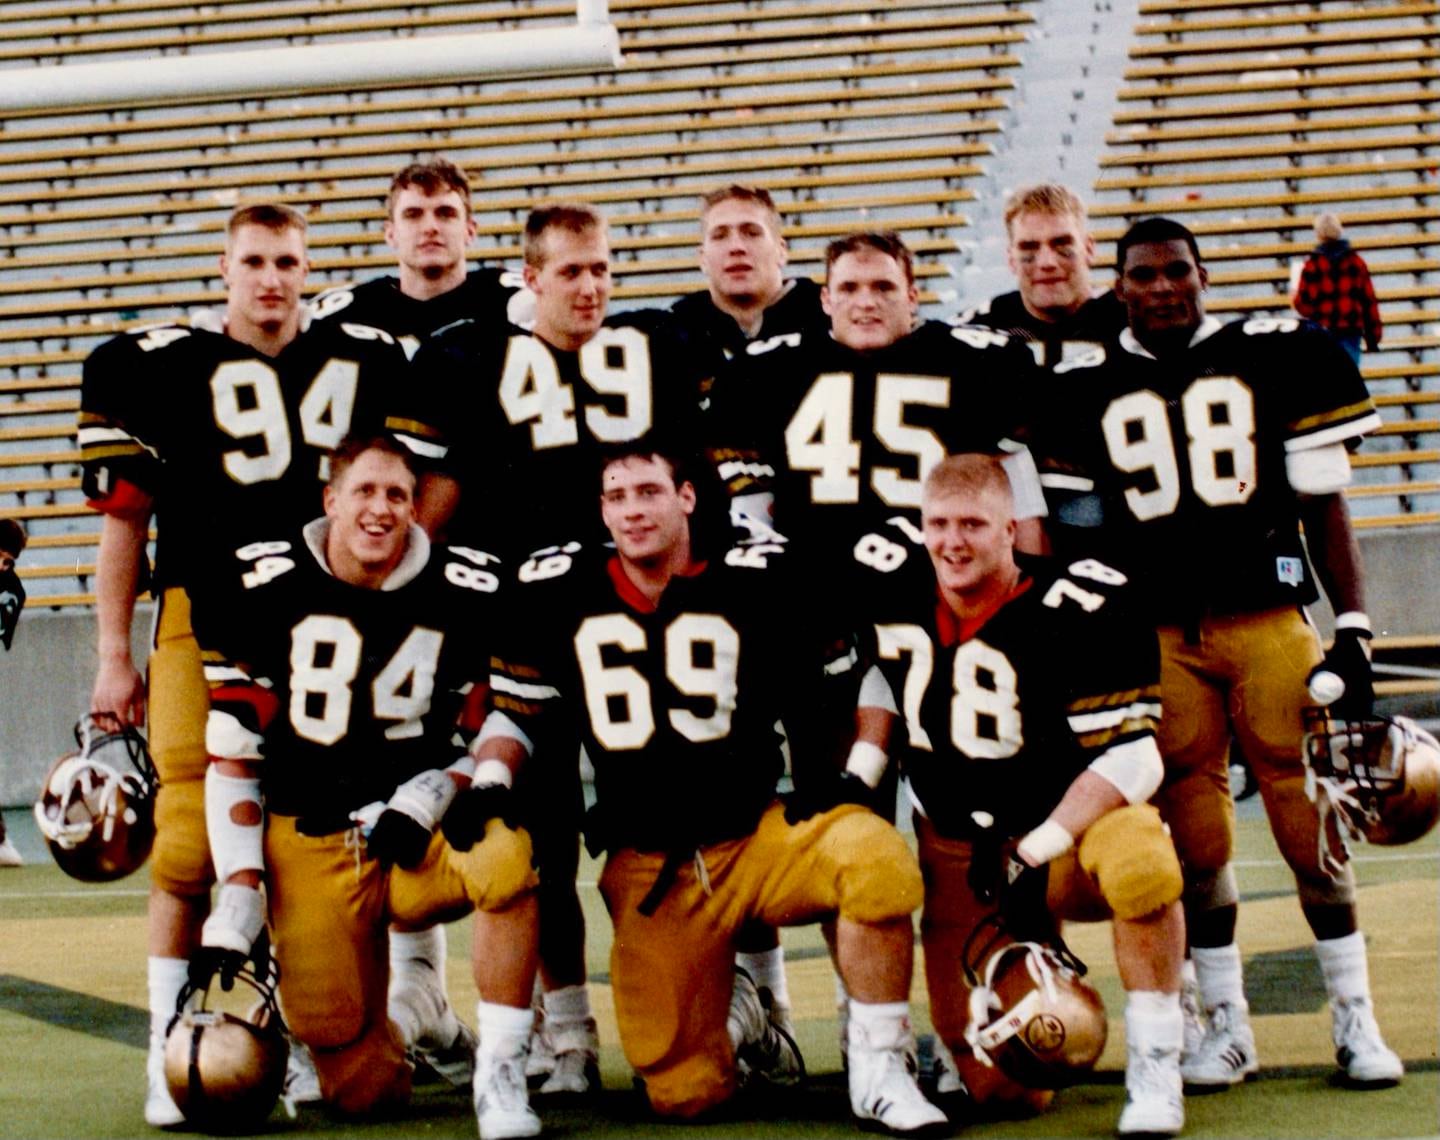 Greg Gadson wears number 98 at the far right. Gadson played outside linebacker for the U.S. Military Academy at West Point. Will Huff, #78, front row, would play an important role later on when he escorted Gadson on the flight from Baghdad to Landstuhl, Germany. Behind Gadson stands Chuck Schretzman, back row.